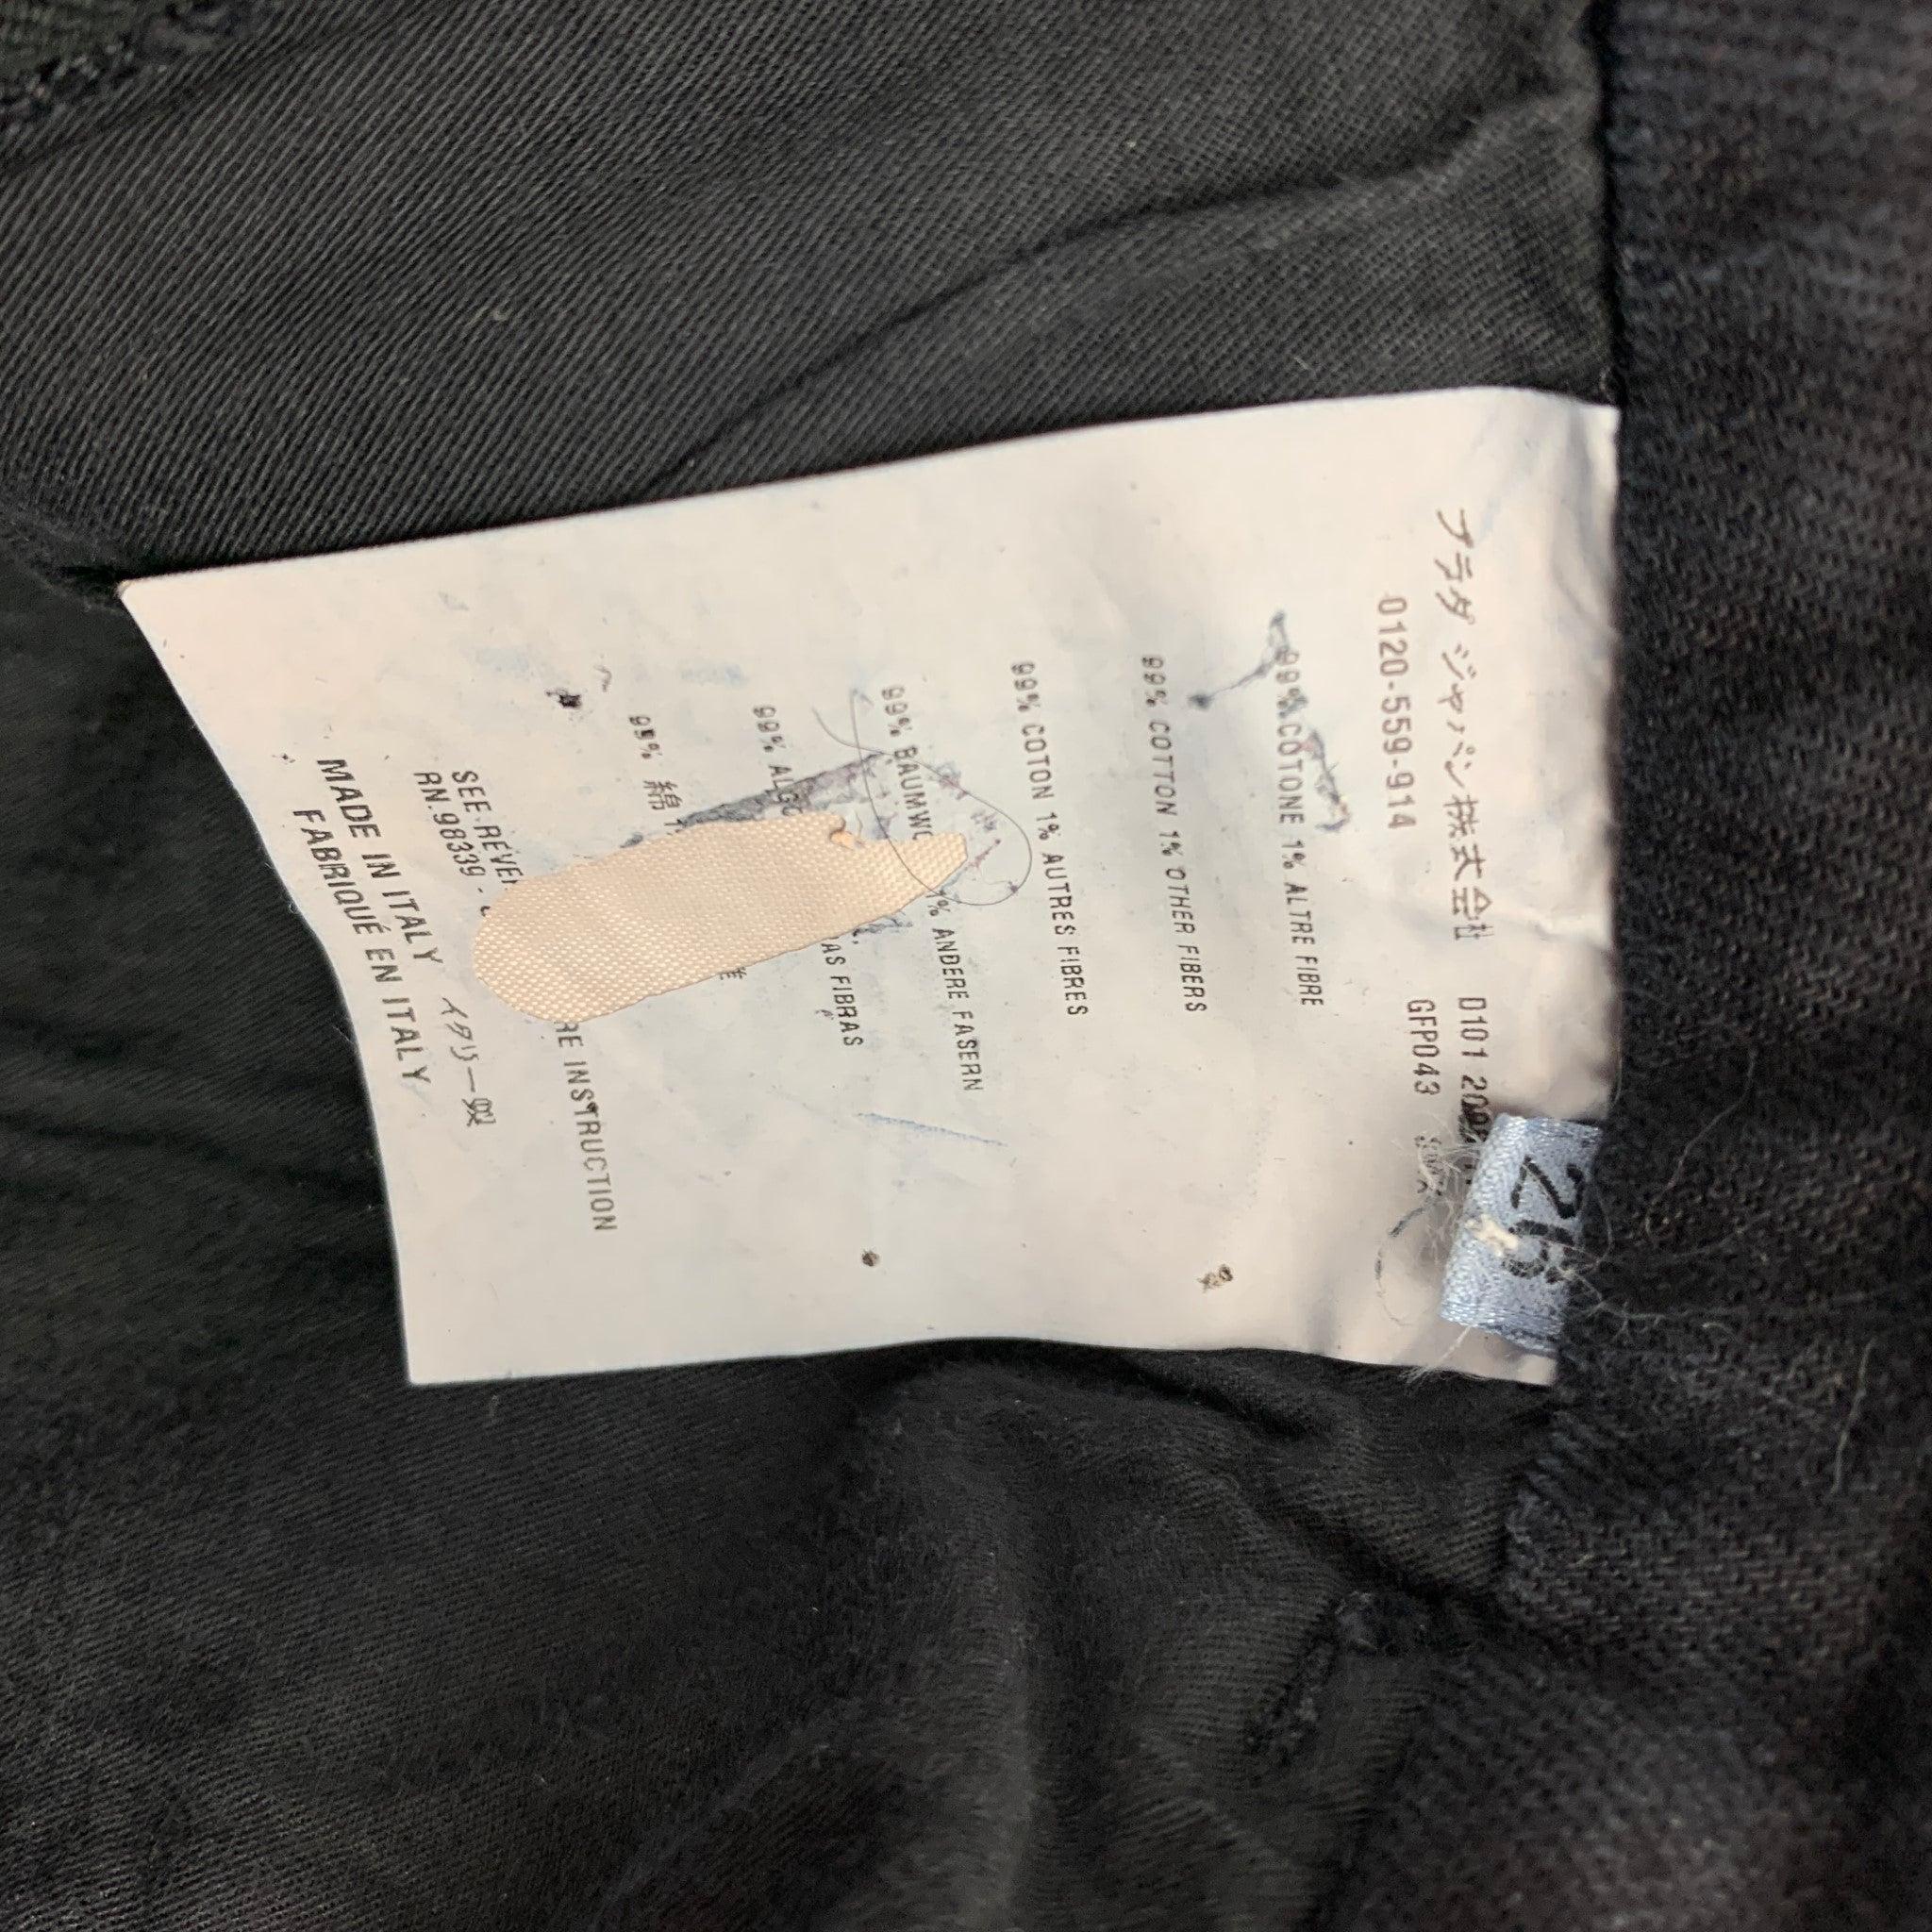 PRADA Size 2 Black Cotton Blend Side Zipper Shorts In Good Condition For Sale In San Francisco, CA